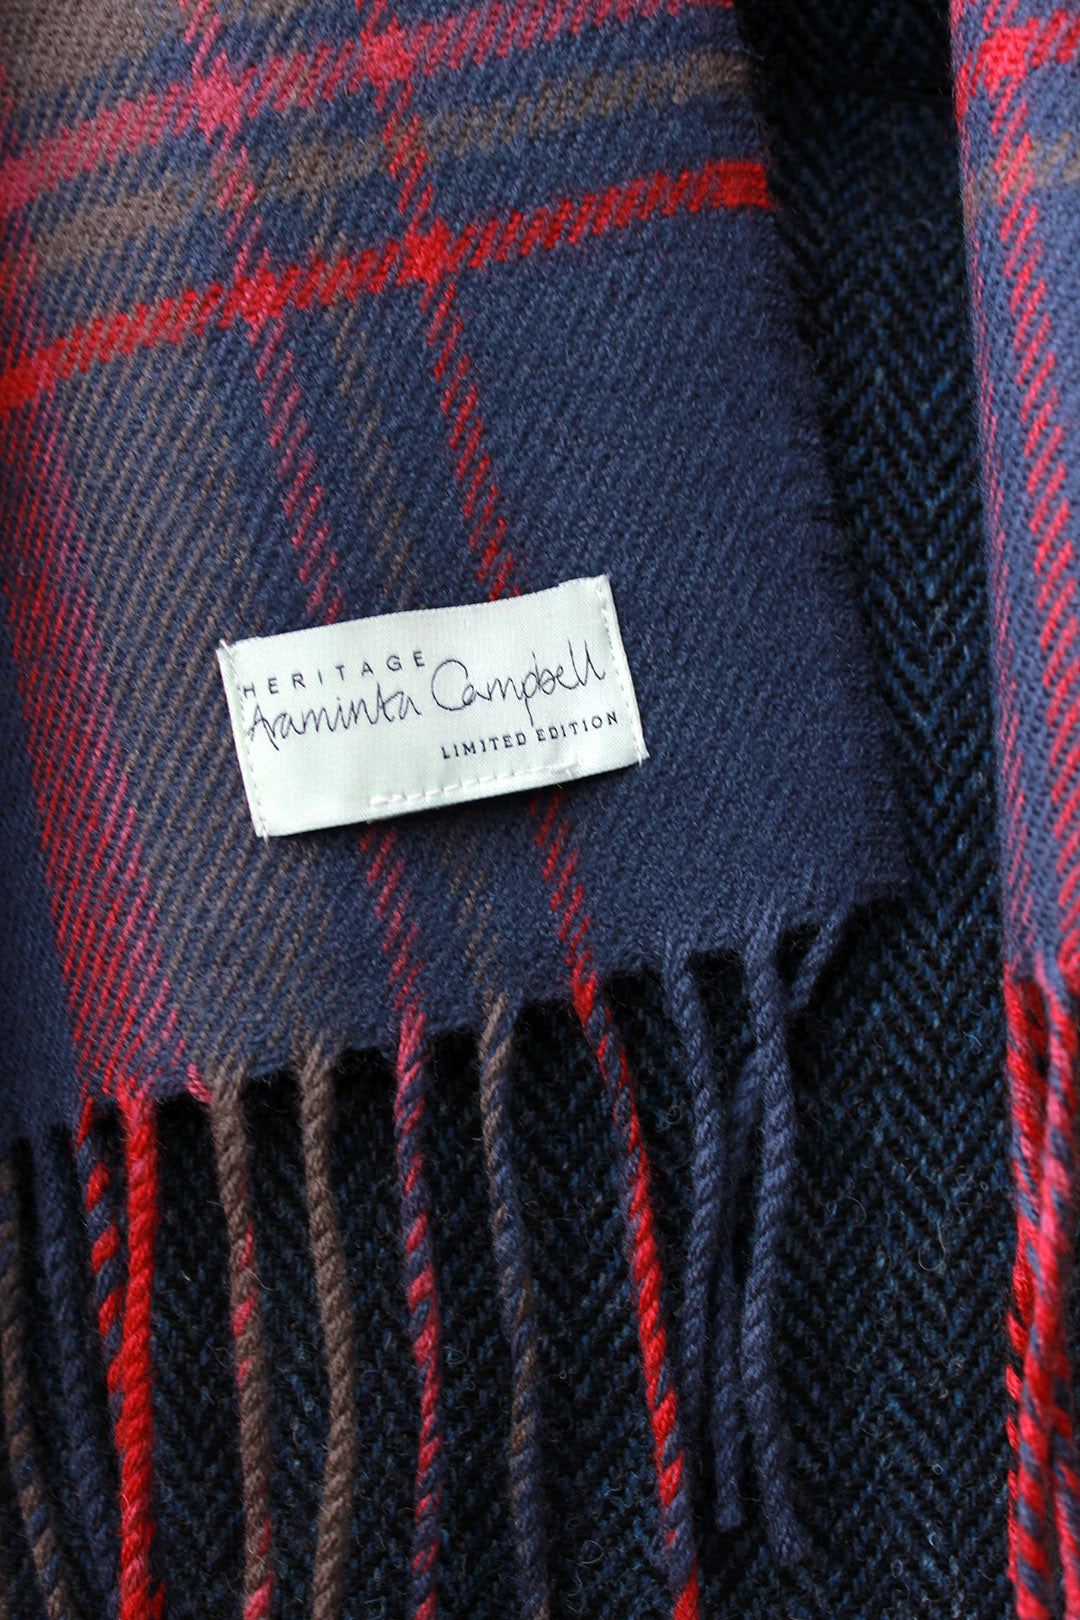 Araminta Campebell Highlands at Dusk woven lambswool serape with tassels. Woven with muted dusky blue, grey and sunset red. Scottish Textiles Showcase.